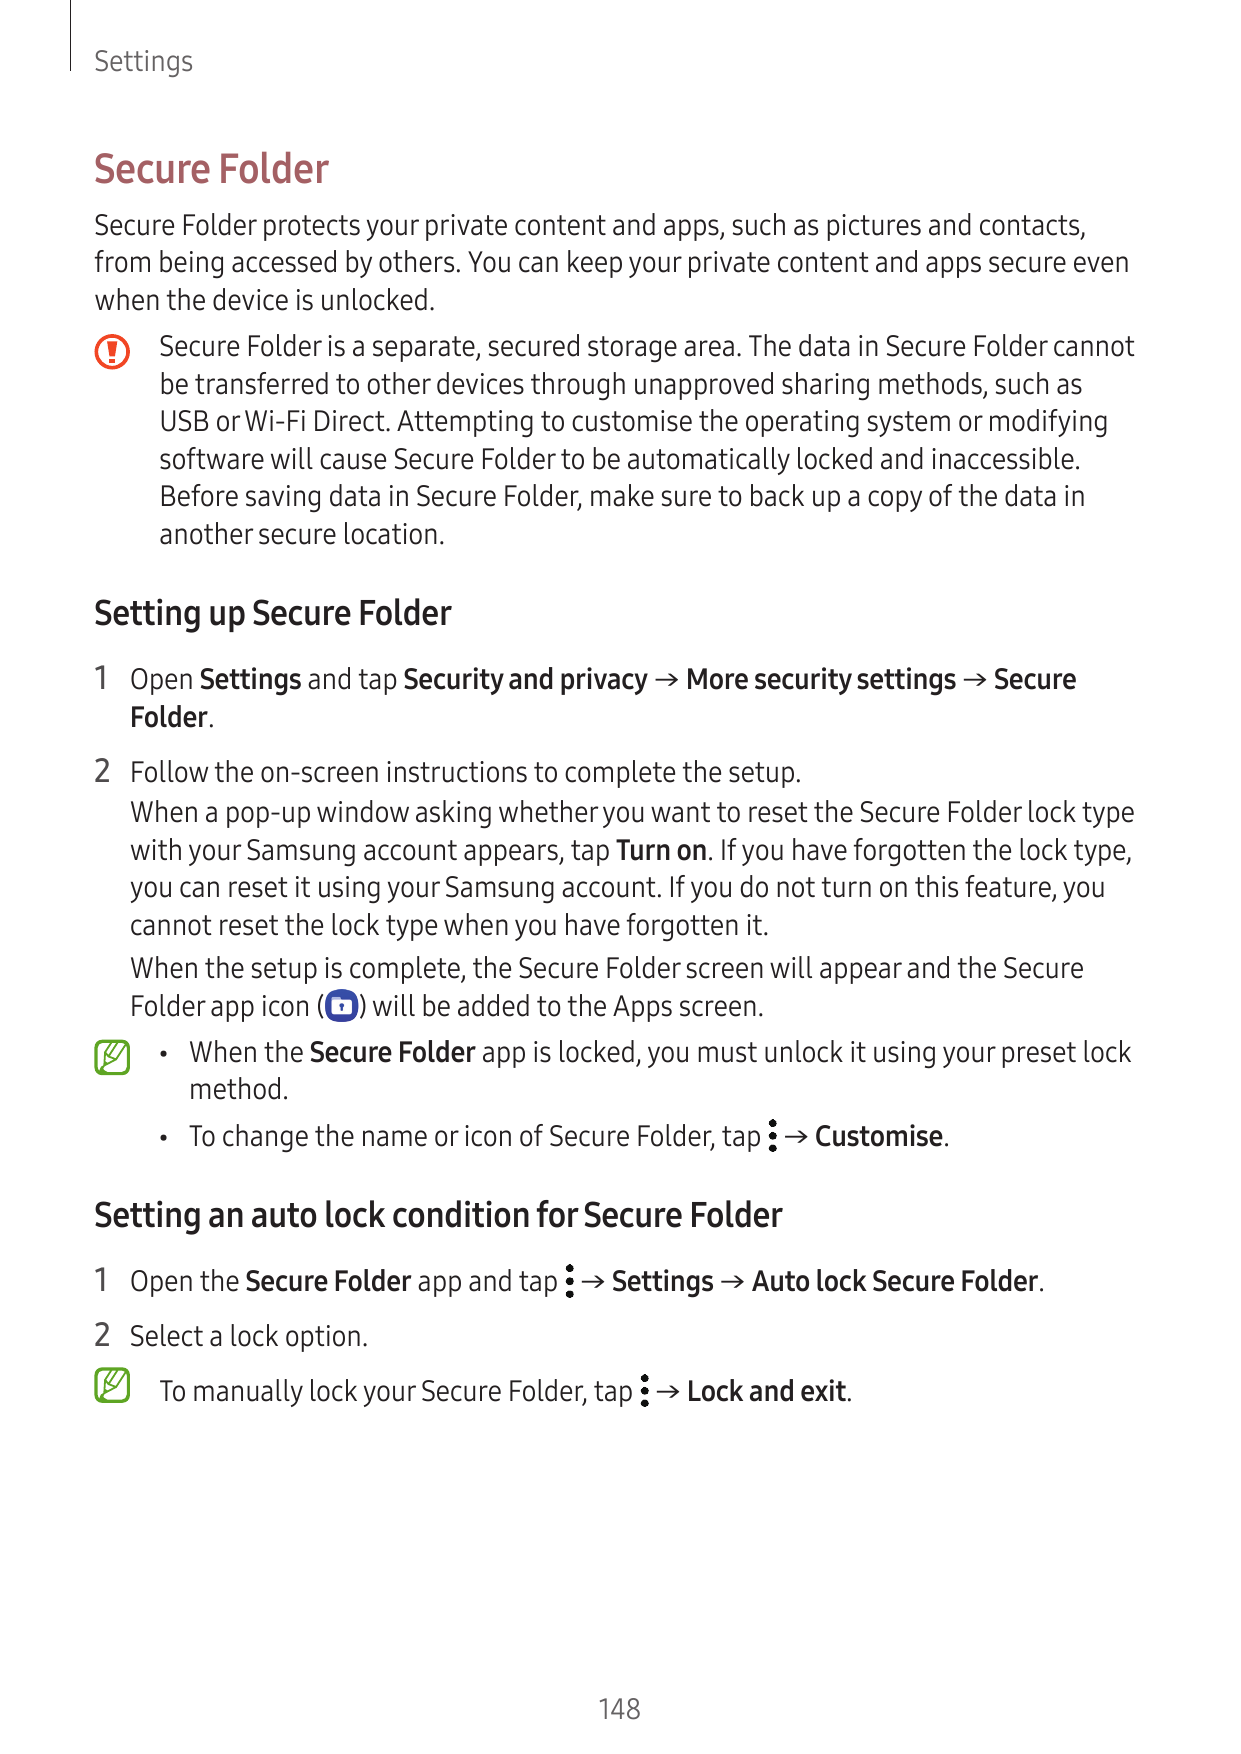 SettingsSecure FolderSecure Folder protects your private content and apps, such as pictures and contacts,from being accessed by 